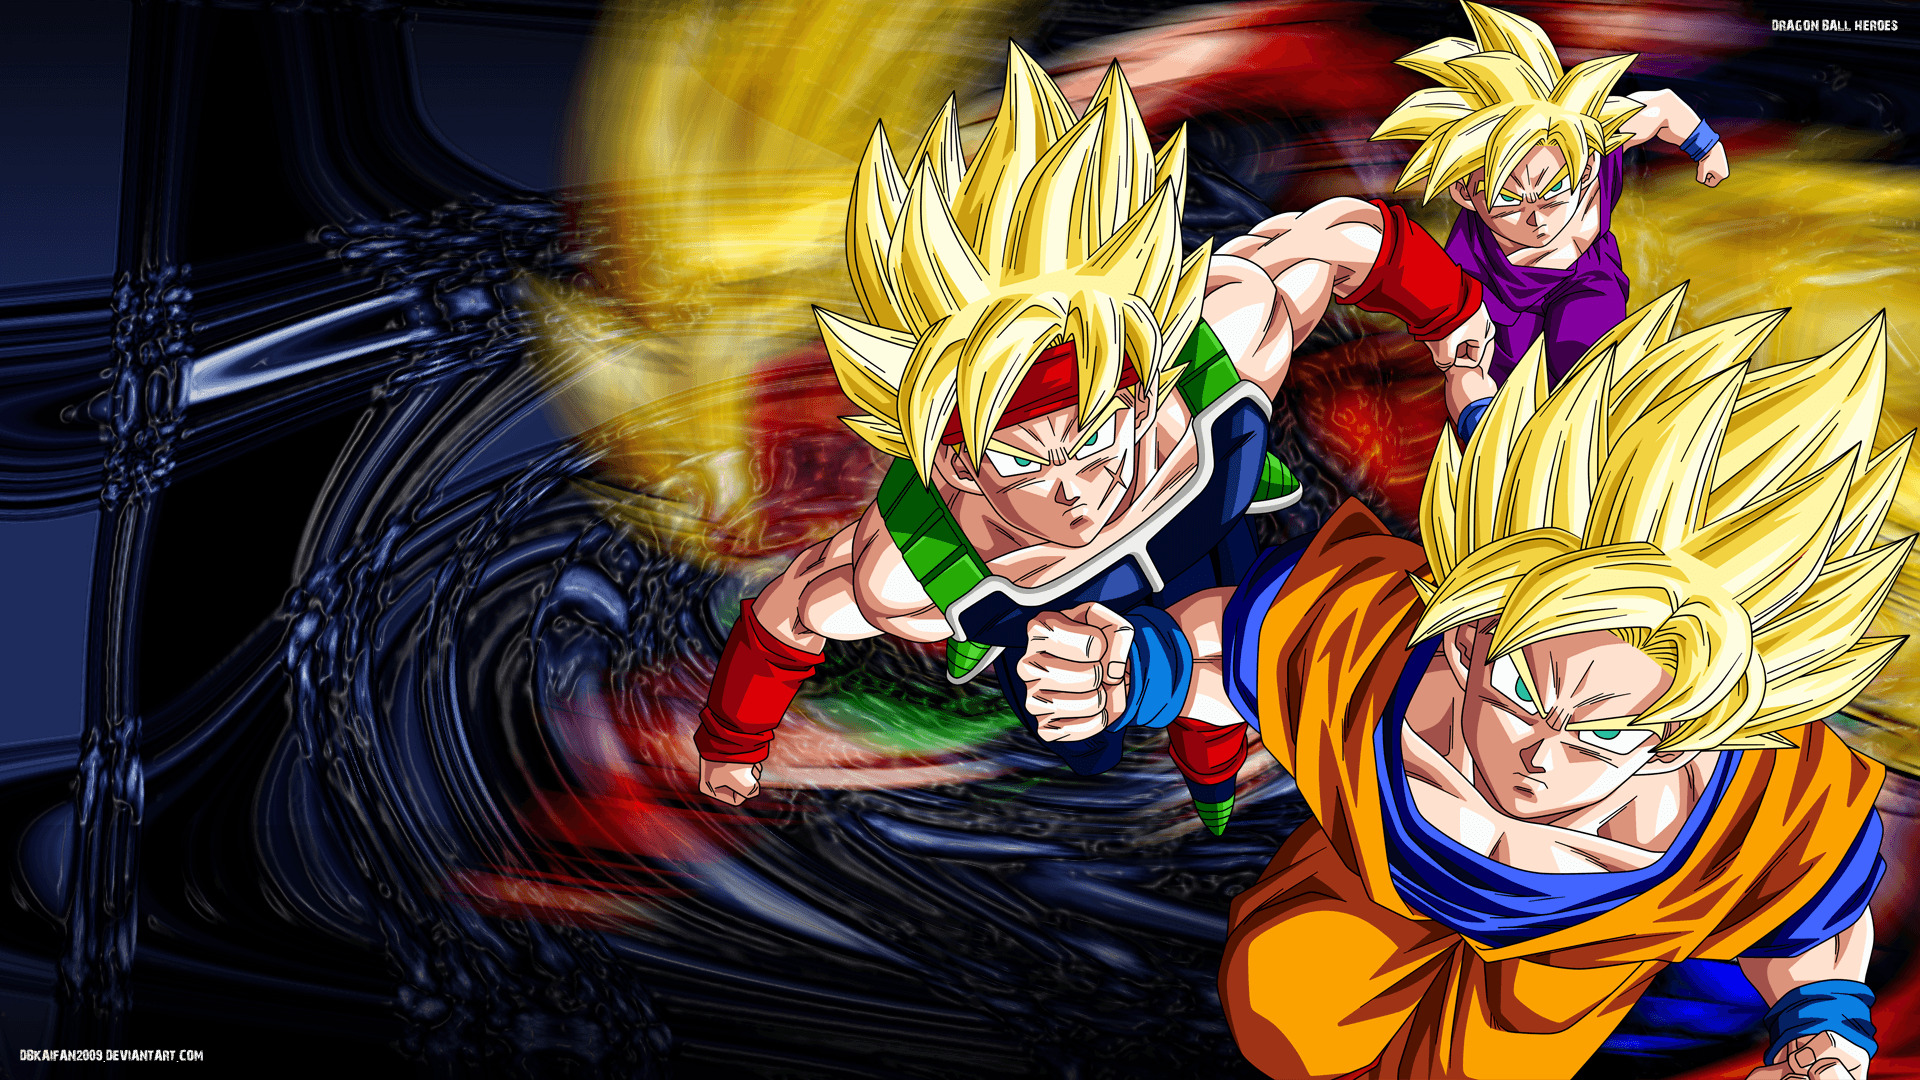 Tons of awesome Dragon Ball Heroes wallpapers to download for free. 